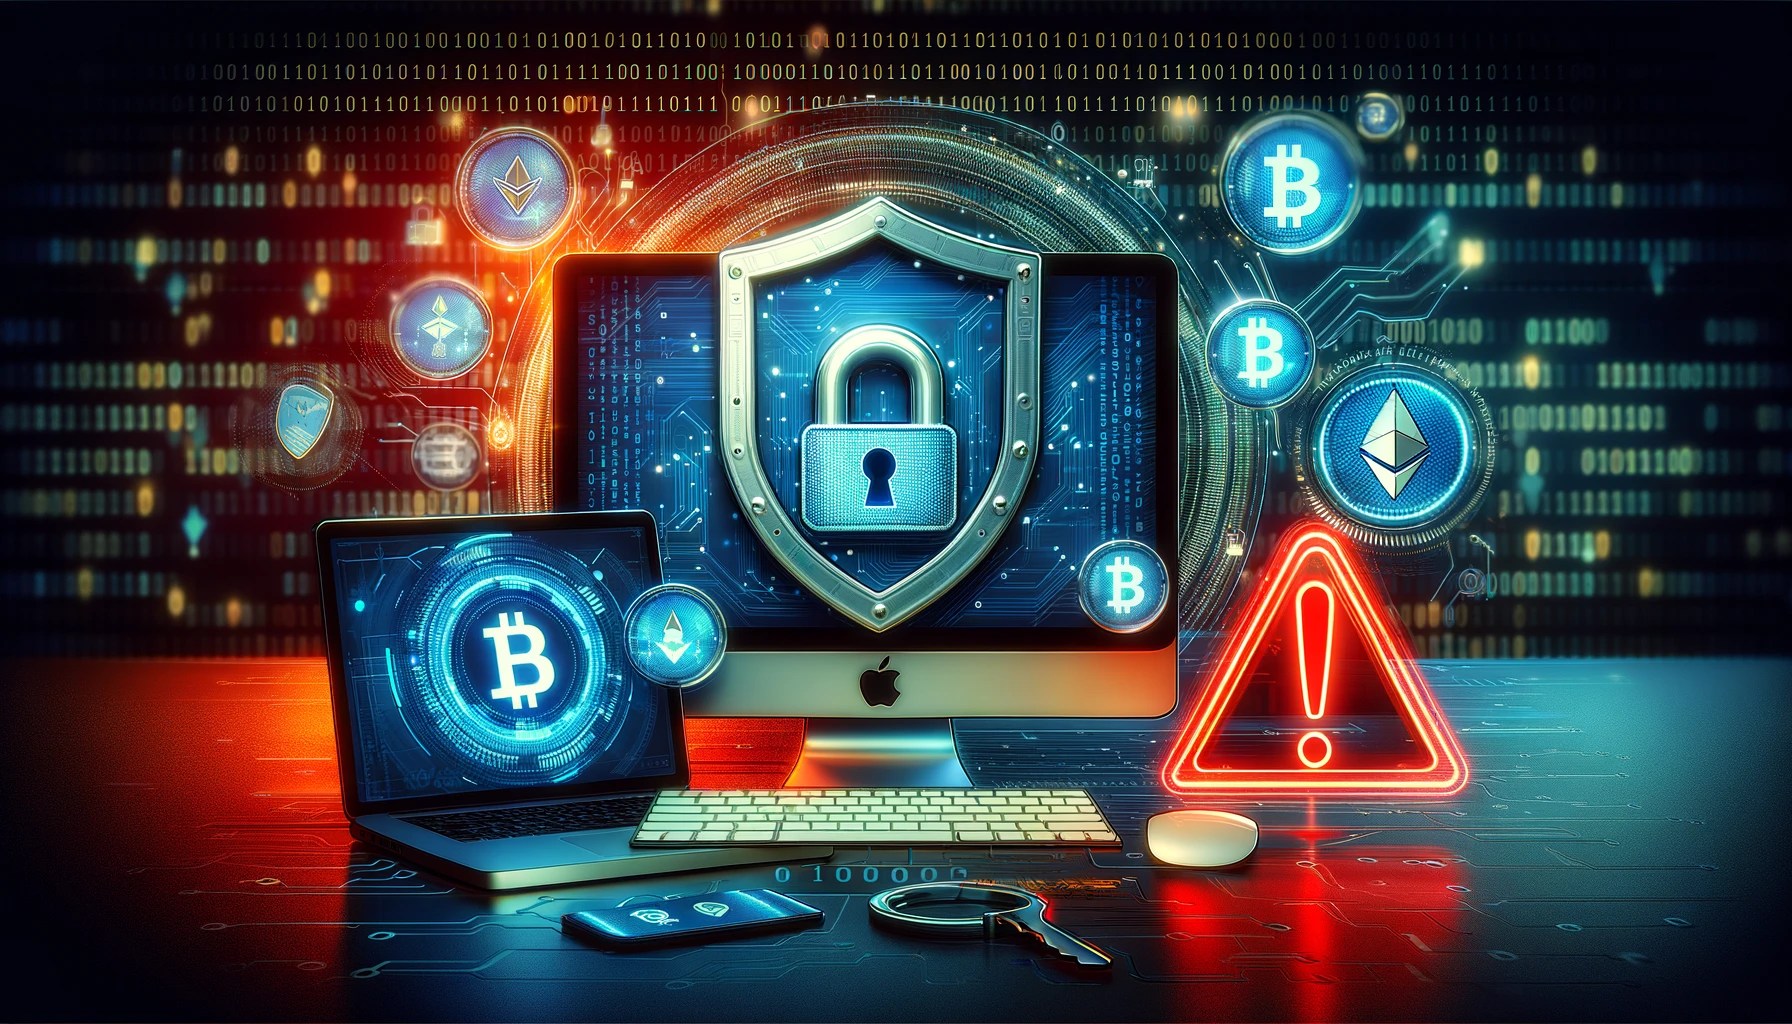 Alert For Apple Mac Users: Your Cryptos Could Be At Risk